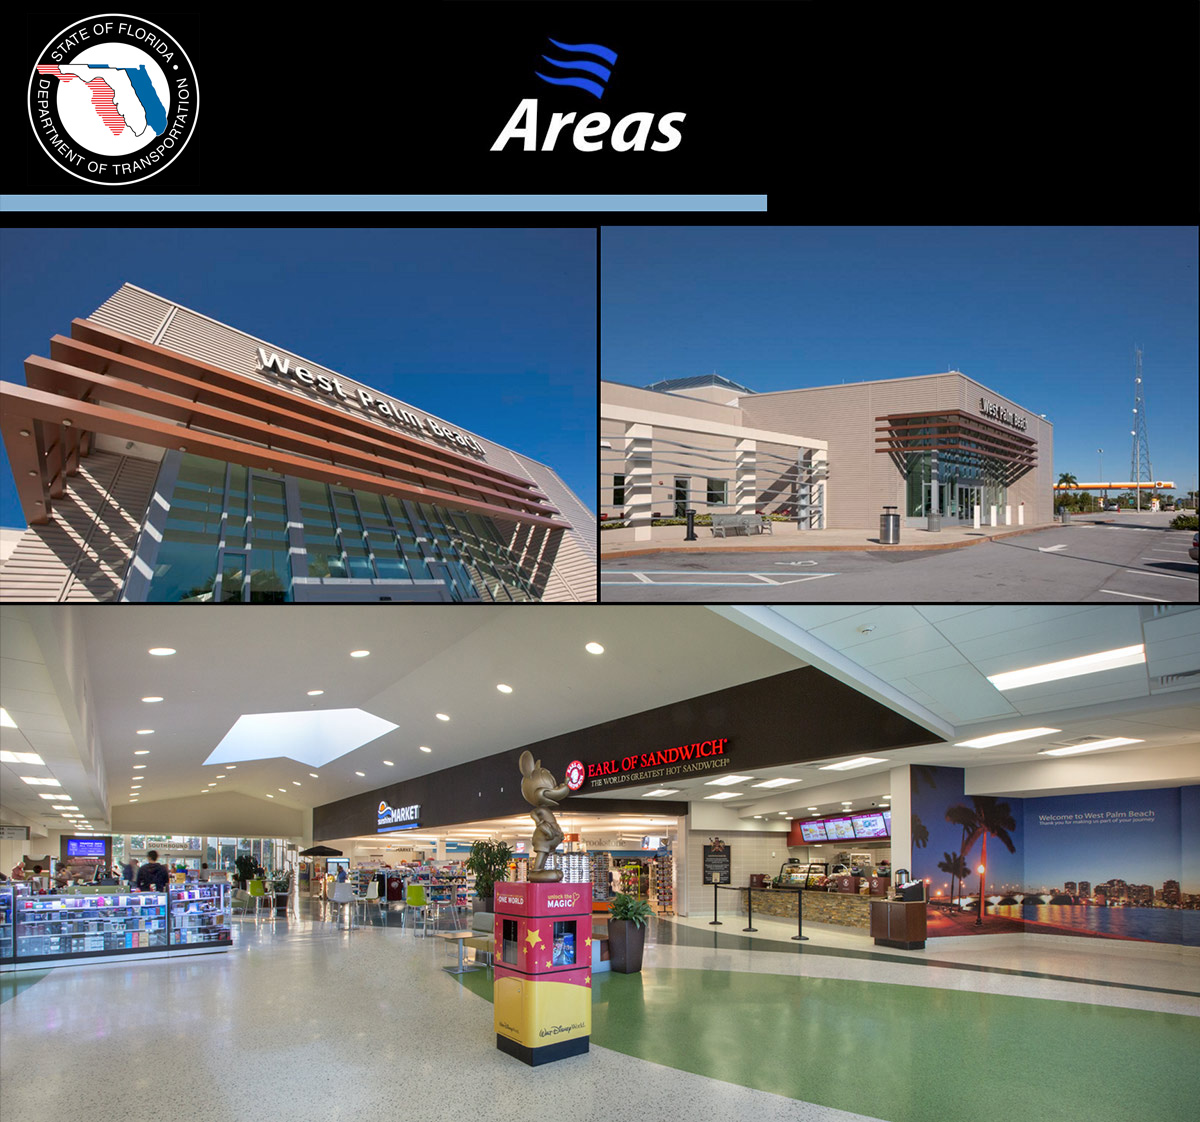 Architectural and interior design views of West Palm Beach FL Service Plaza